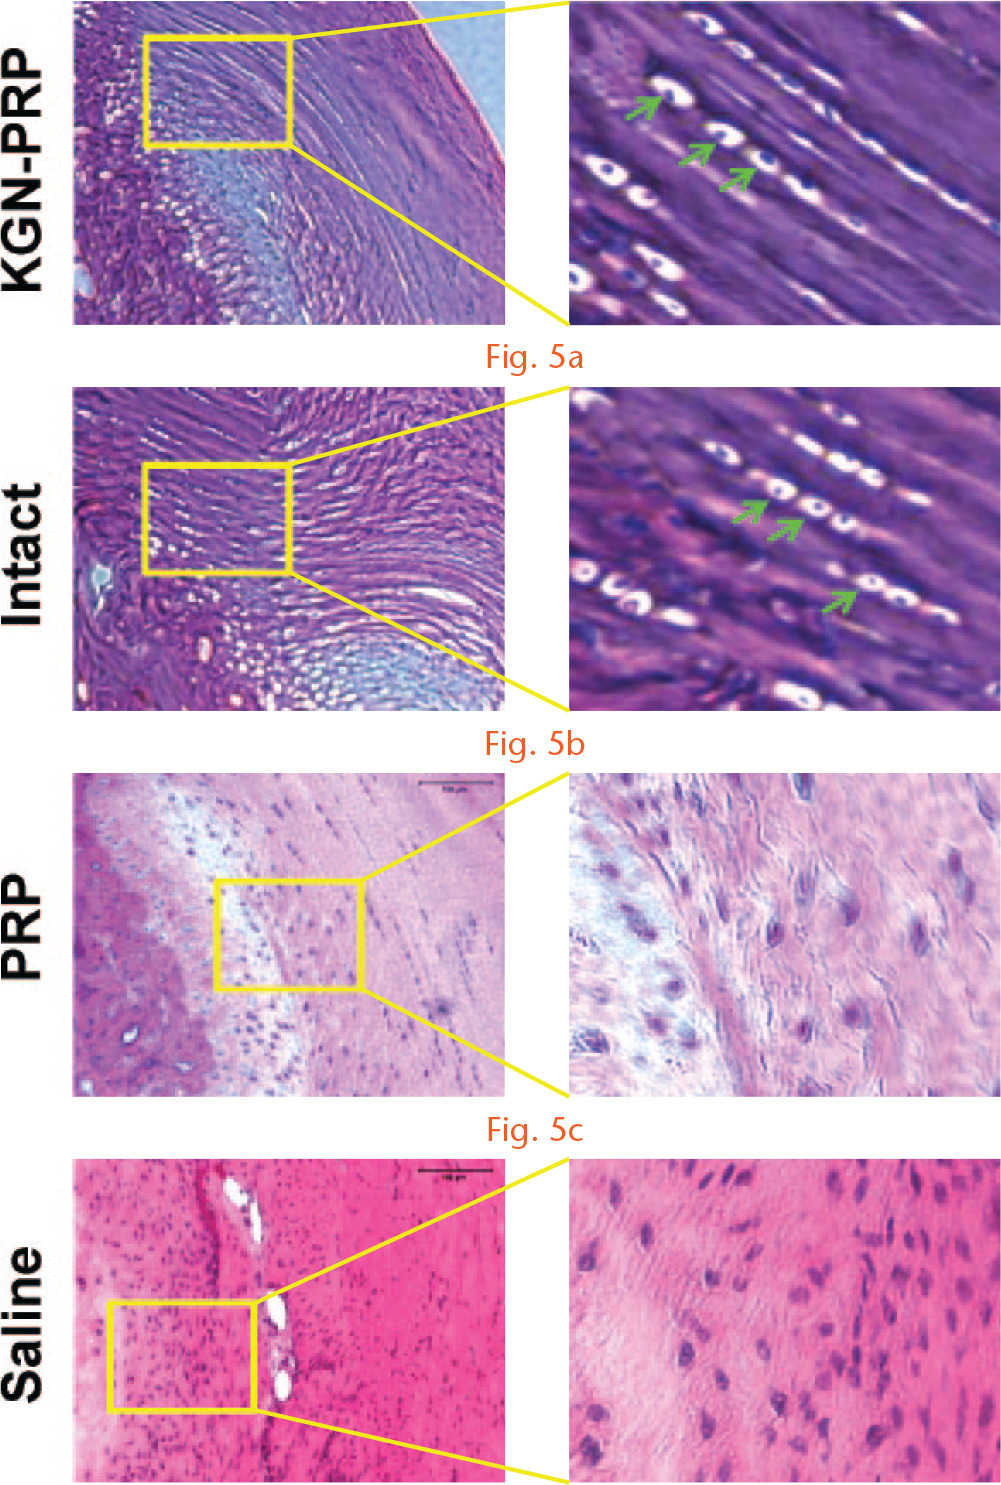  
          Kartogenin-platelet-rich plasma (KGN-PRP) treatment results in well organised collagen fibres in the healing site of wounded rat Achilles tendon entheses (ATE). KGN-PRP-treated ATE (a) shows well organised arrangement of collagen fibres; moreover, mature chondrocytes that align with collagen fibres are present in the transition zone between tendon and bone (arrows), which are similar to those of intact rat ATEs (b). The PRP-treated ATE (c) has less organised collagen fibres; and saline-treated ATE (d) reveals defects in the healed ATE evidenced by gaps. In both PRP and saline groups, formation of chondrocytes is not apparent, and cell organization is also random.
        